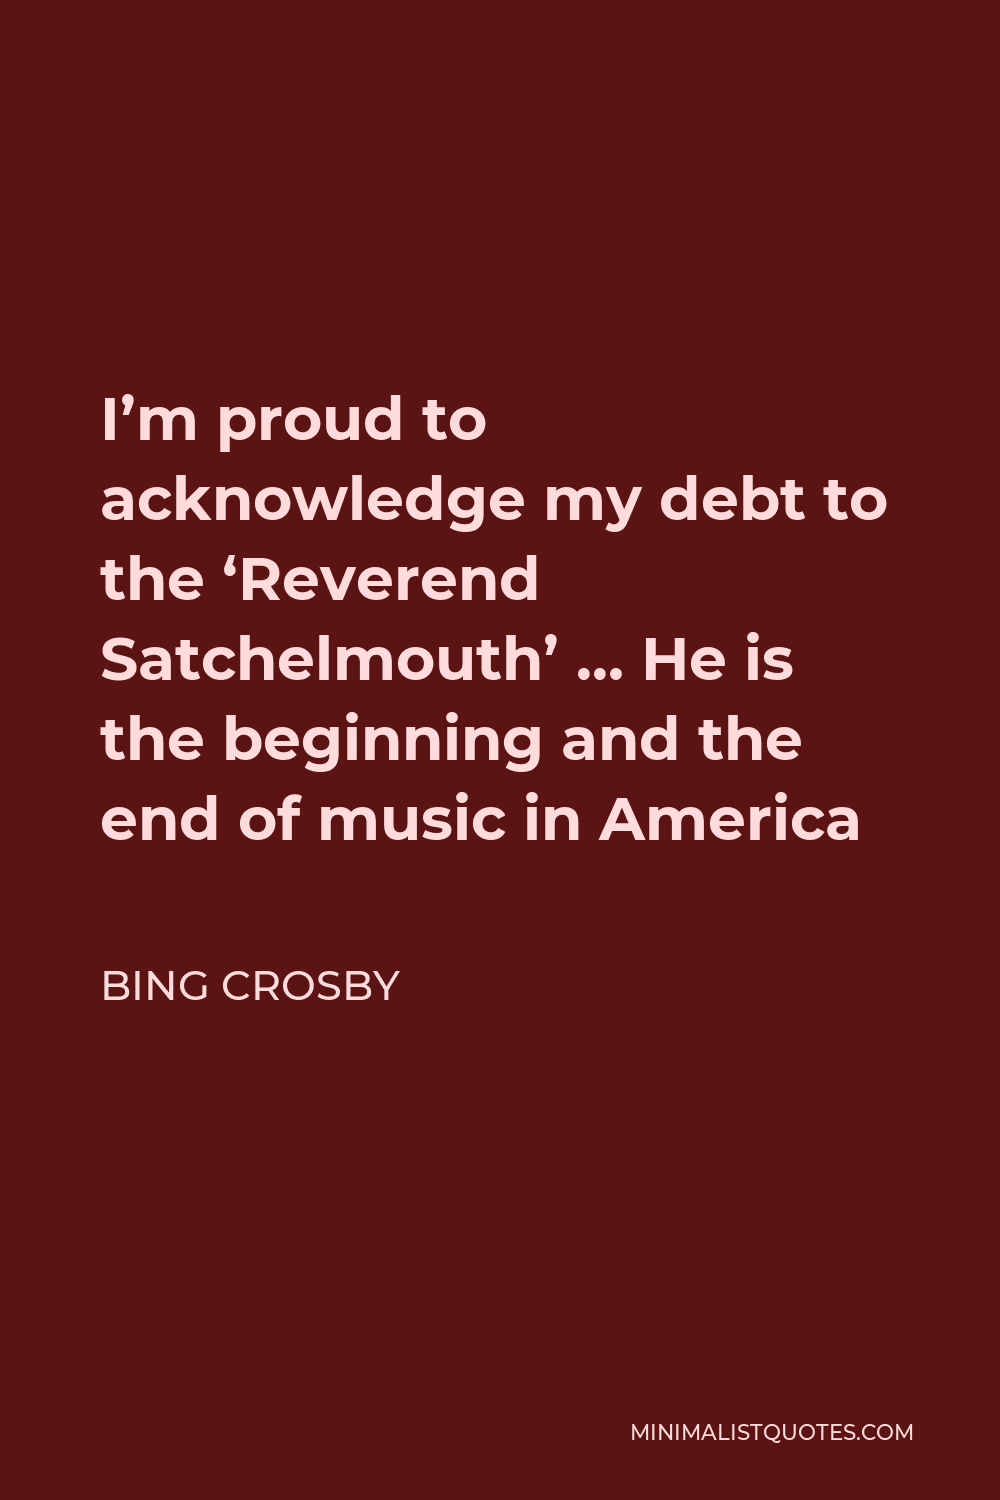 Bing Crosby Quote - I’m proud to acknowledge my debt to the ‘Reverend Satchelmouth’ … He is the beginning and the end of music in America